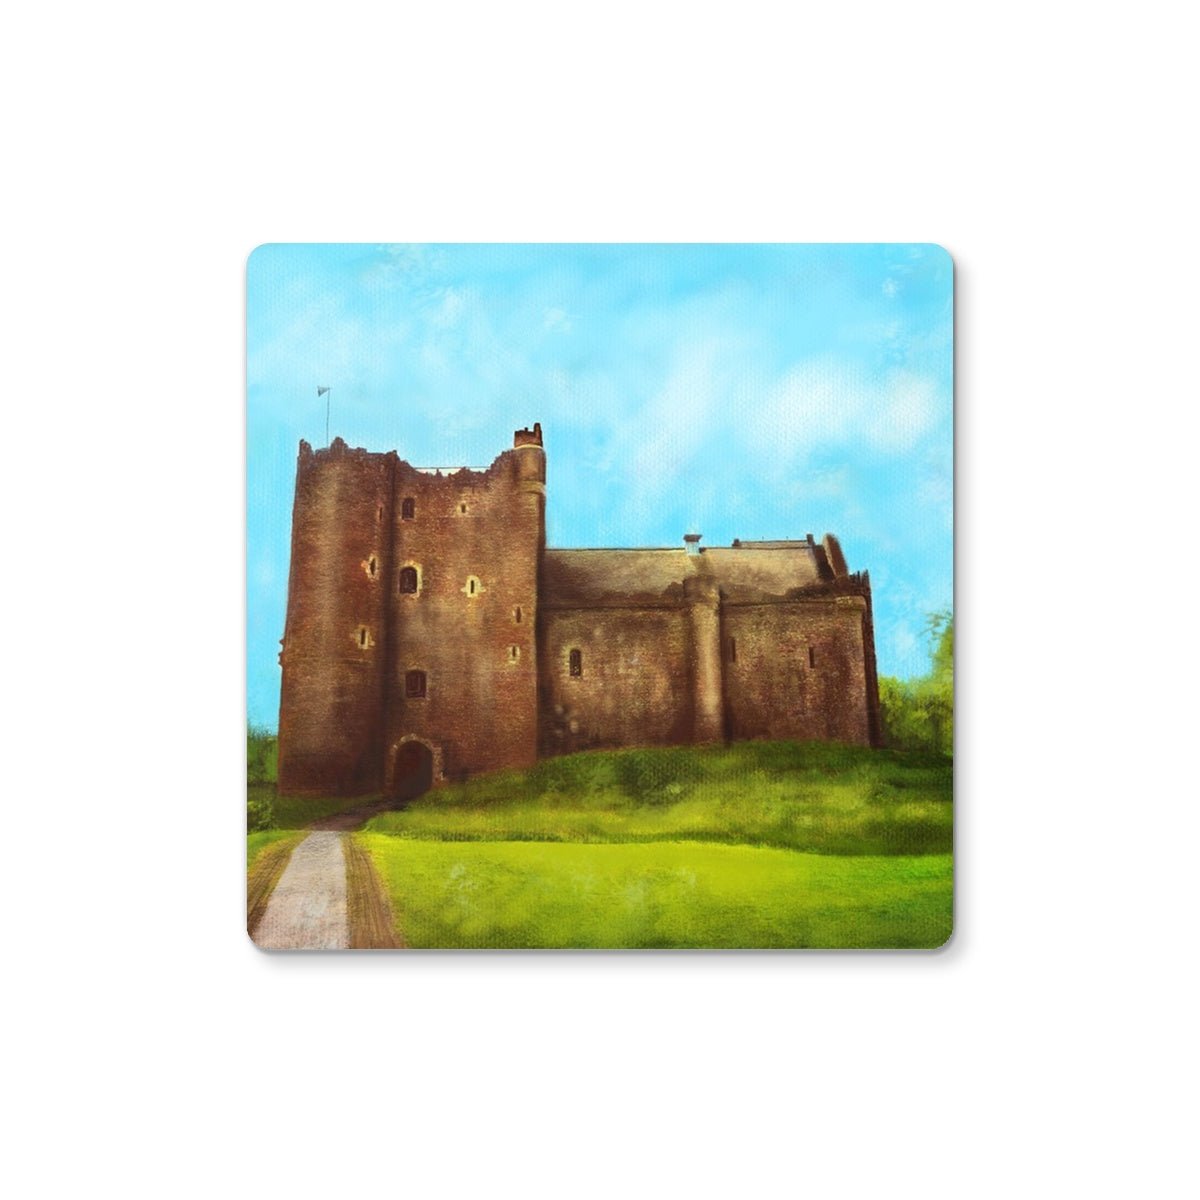 Doune Castle Art Gifts Coaster-Coasters-Historic & Iconic Scotland Art Gallery-2 Coasters-Paintings, Prints, Homeware, Art Gifts From Scotland By Scottish Artist Kevin Hunter